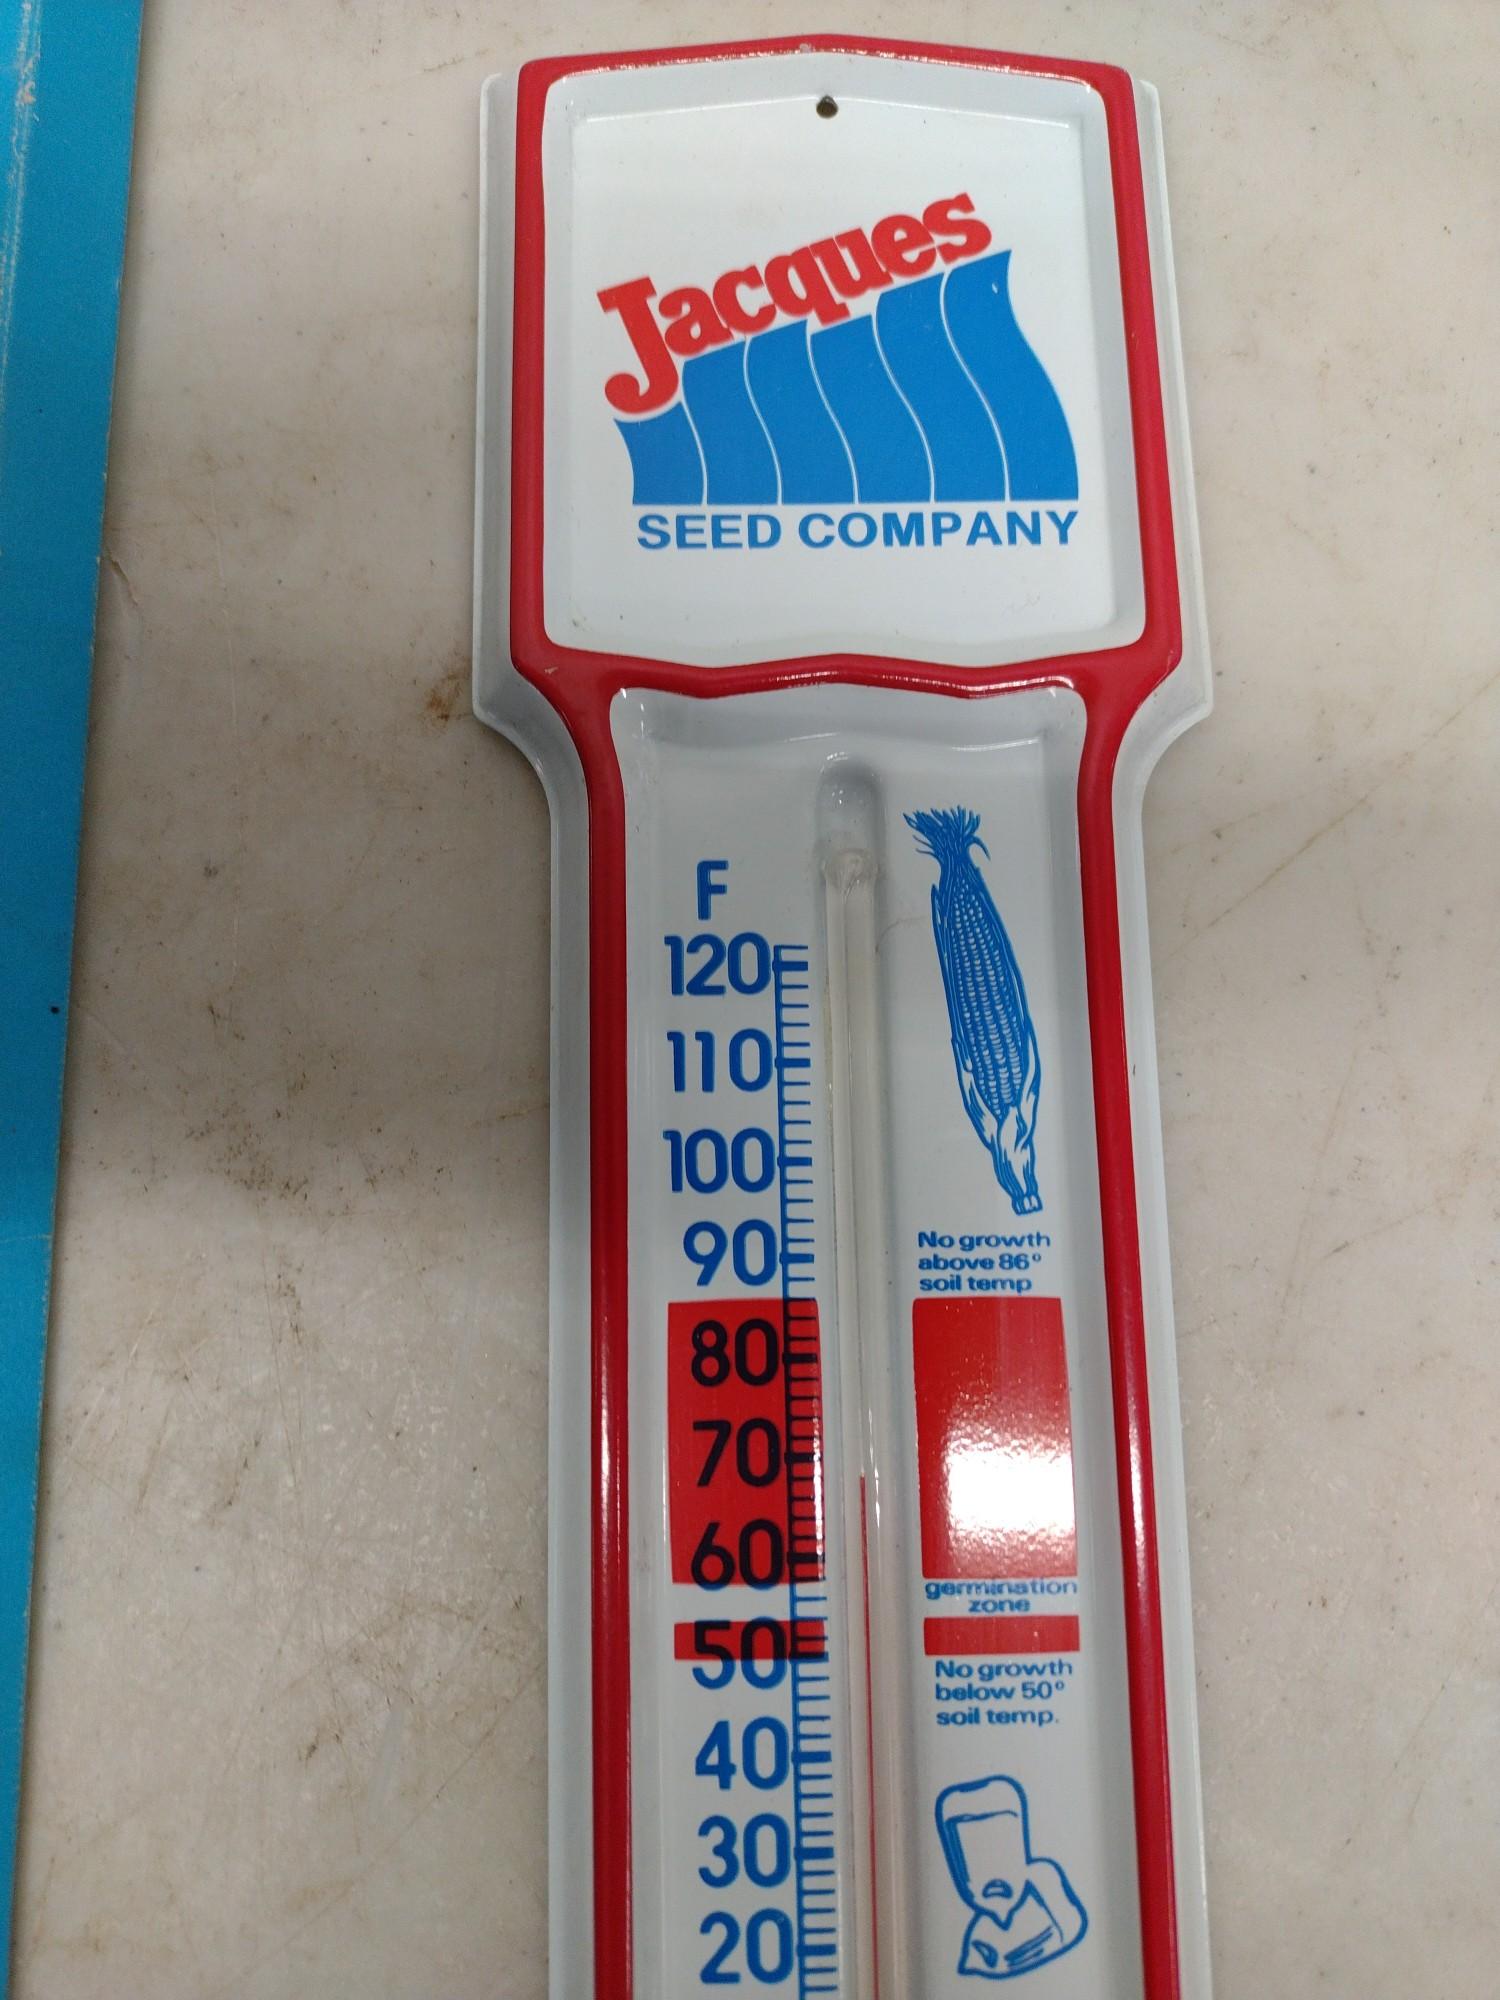 New Old Stock Advertising Thermometer